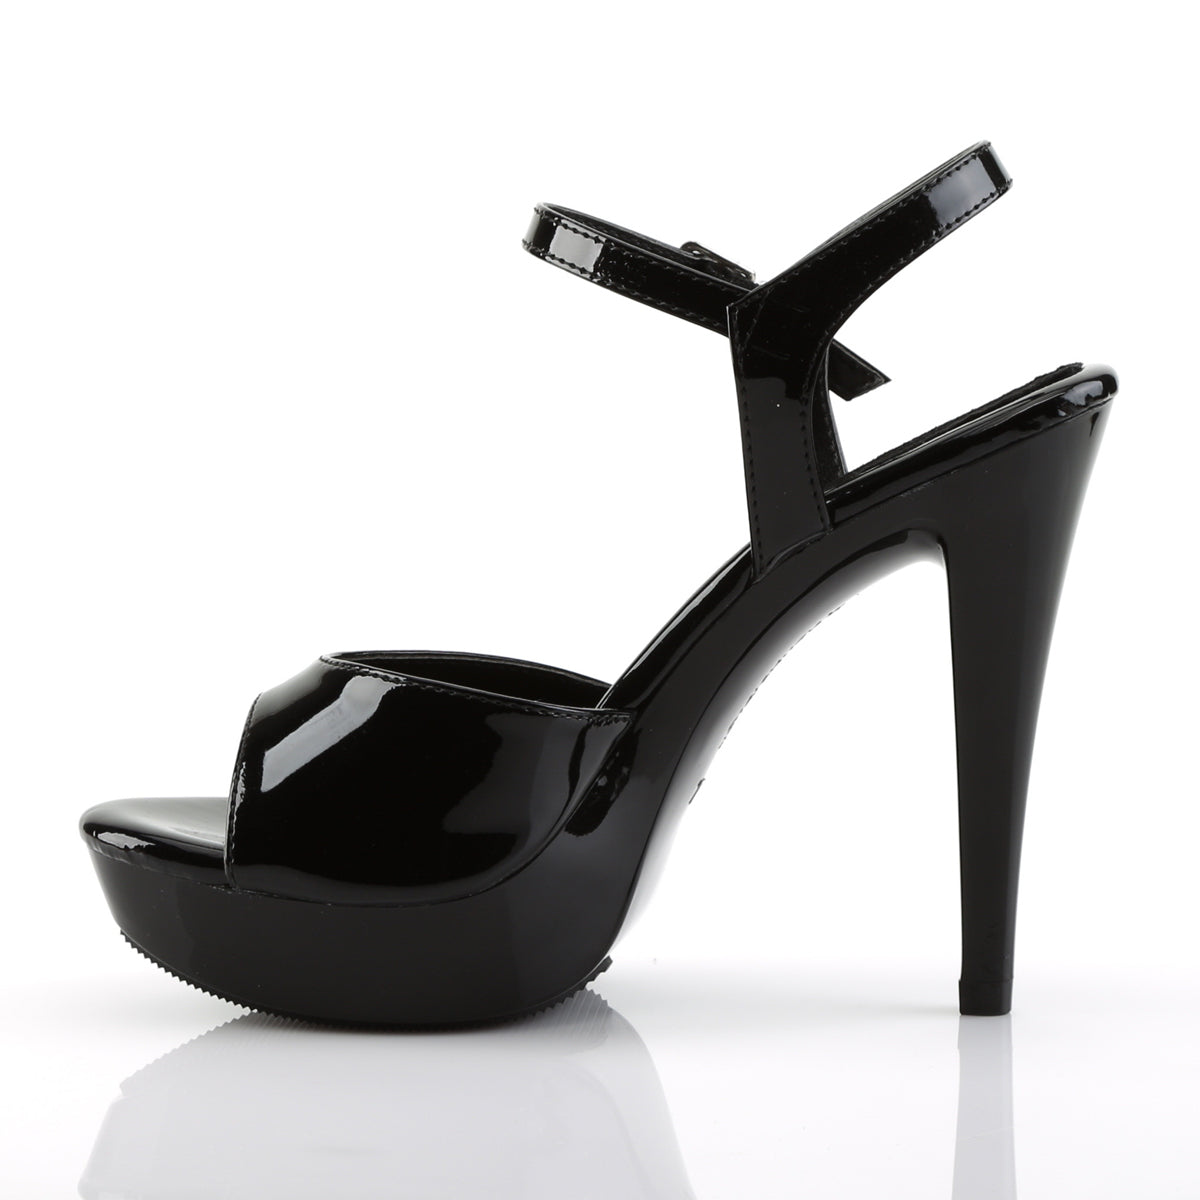 COCKTAIL-509 Fabulicious 5 Inch Heel Black Sexy Shoes – Pole Dancing ...